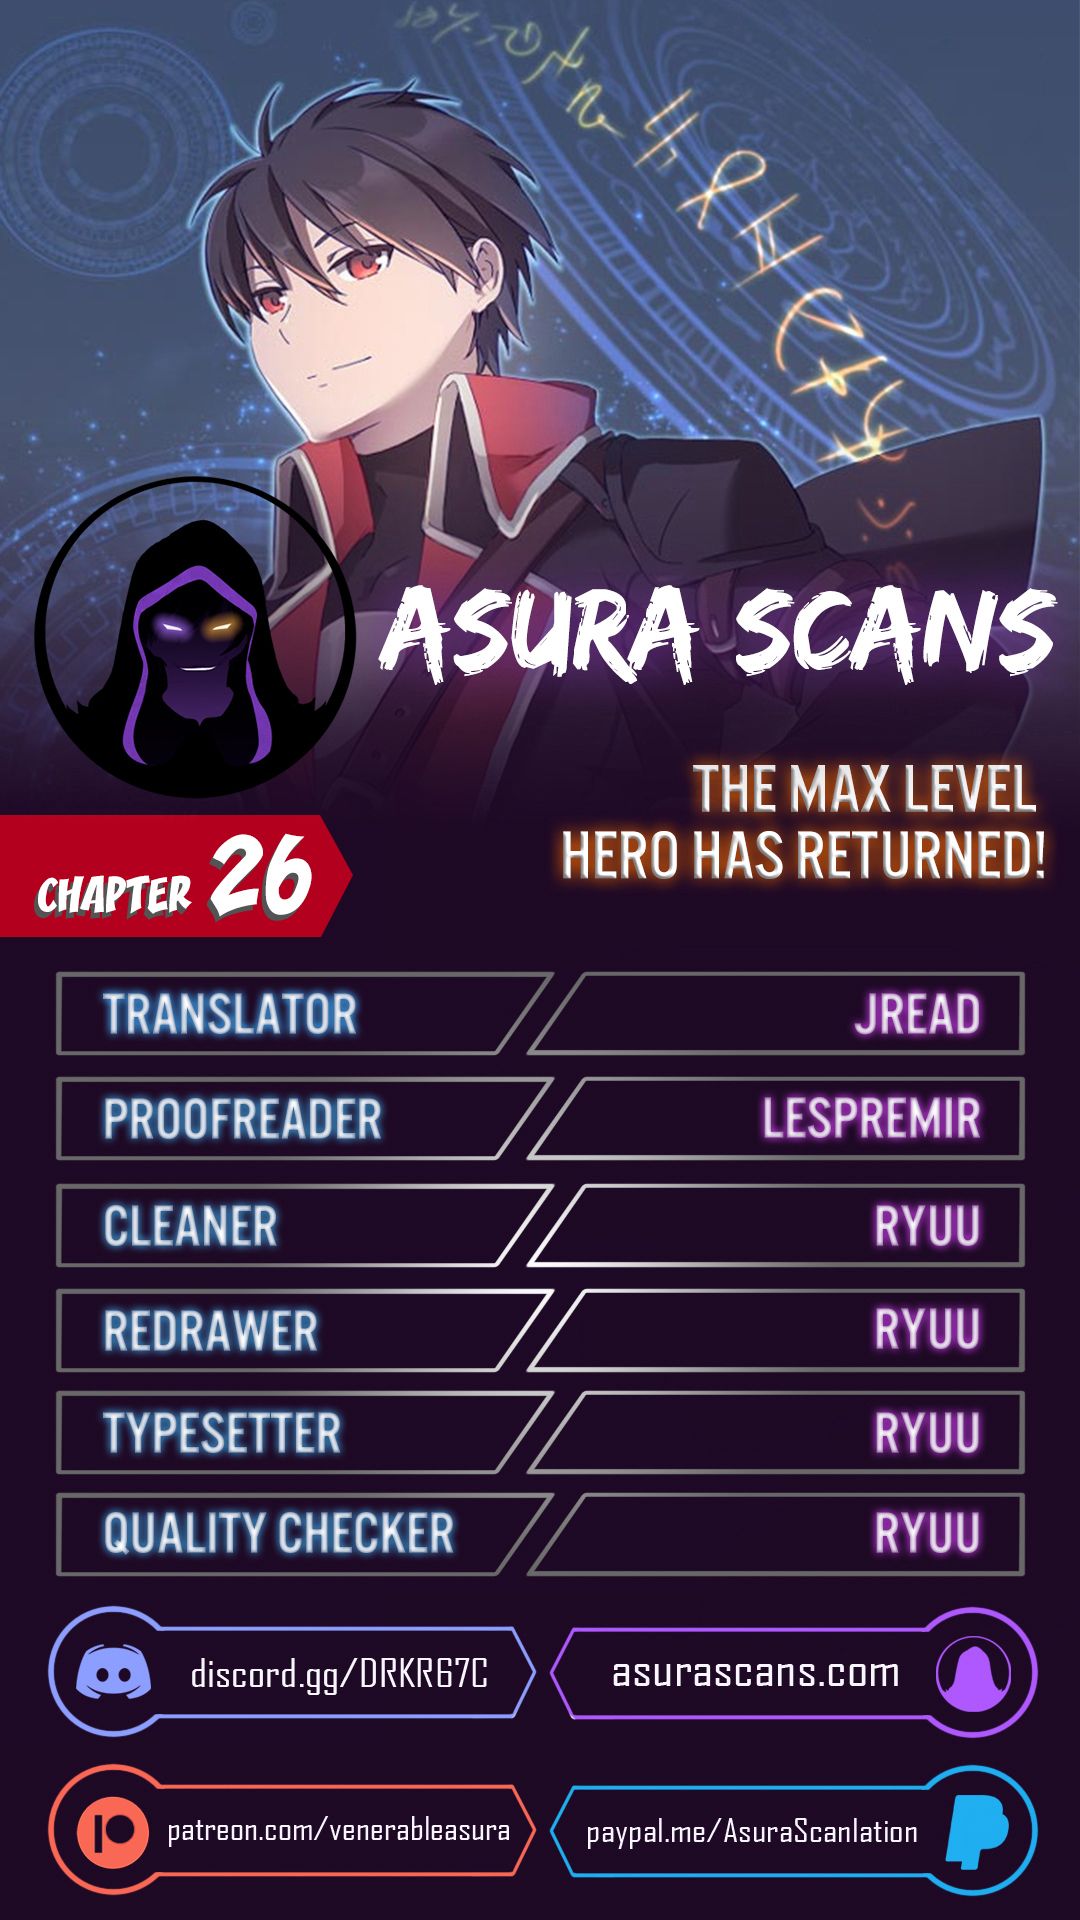 The MAX leveled hero will return! Chapter 26